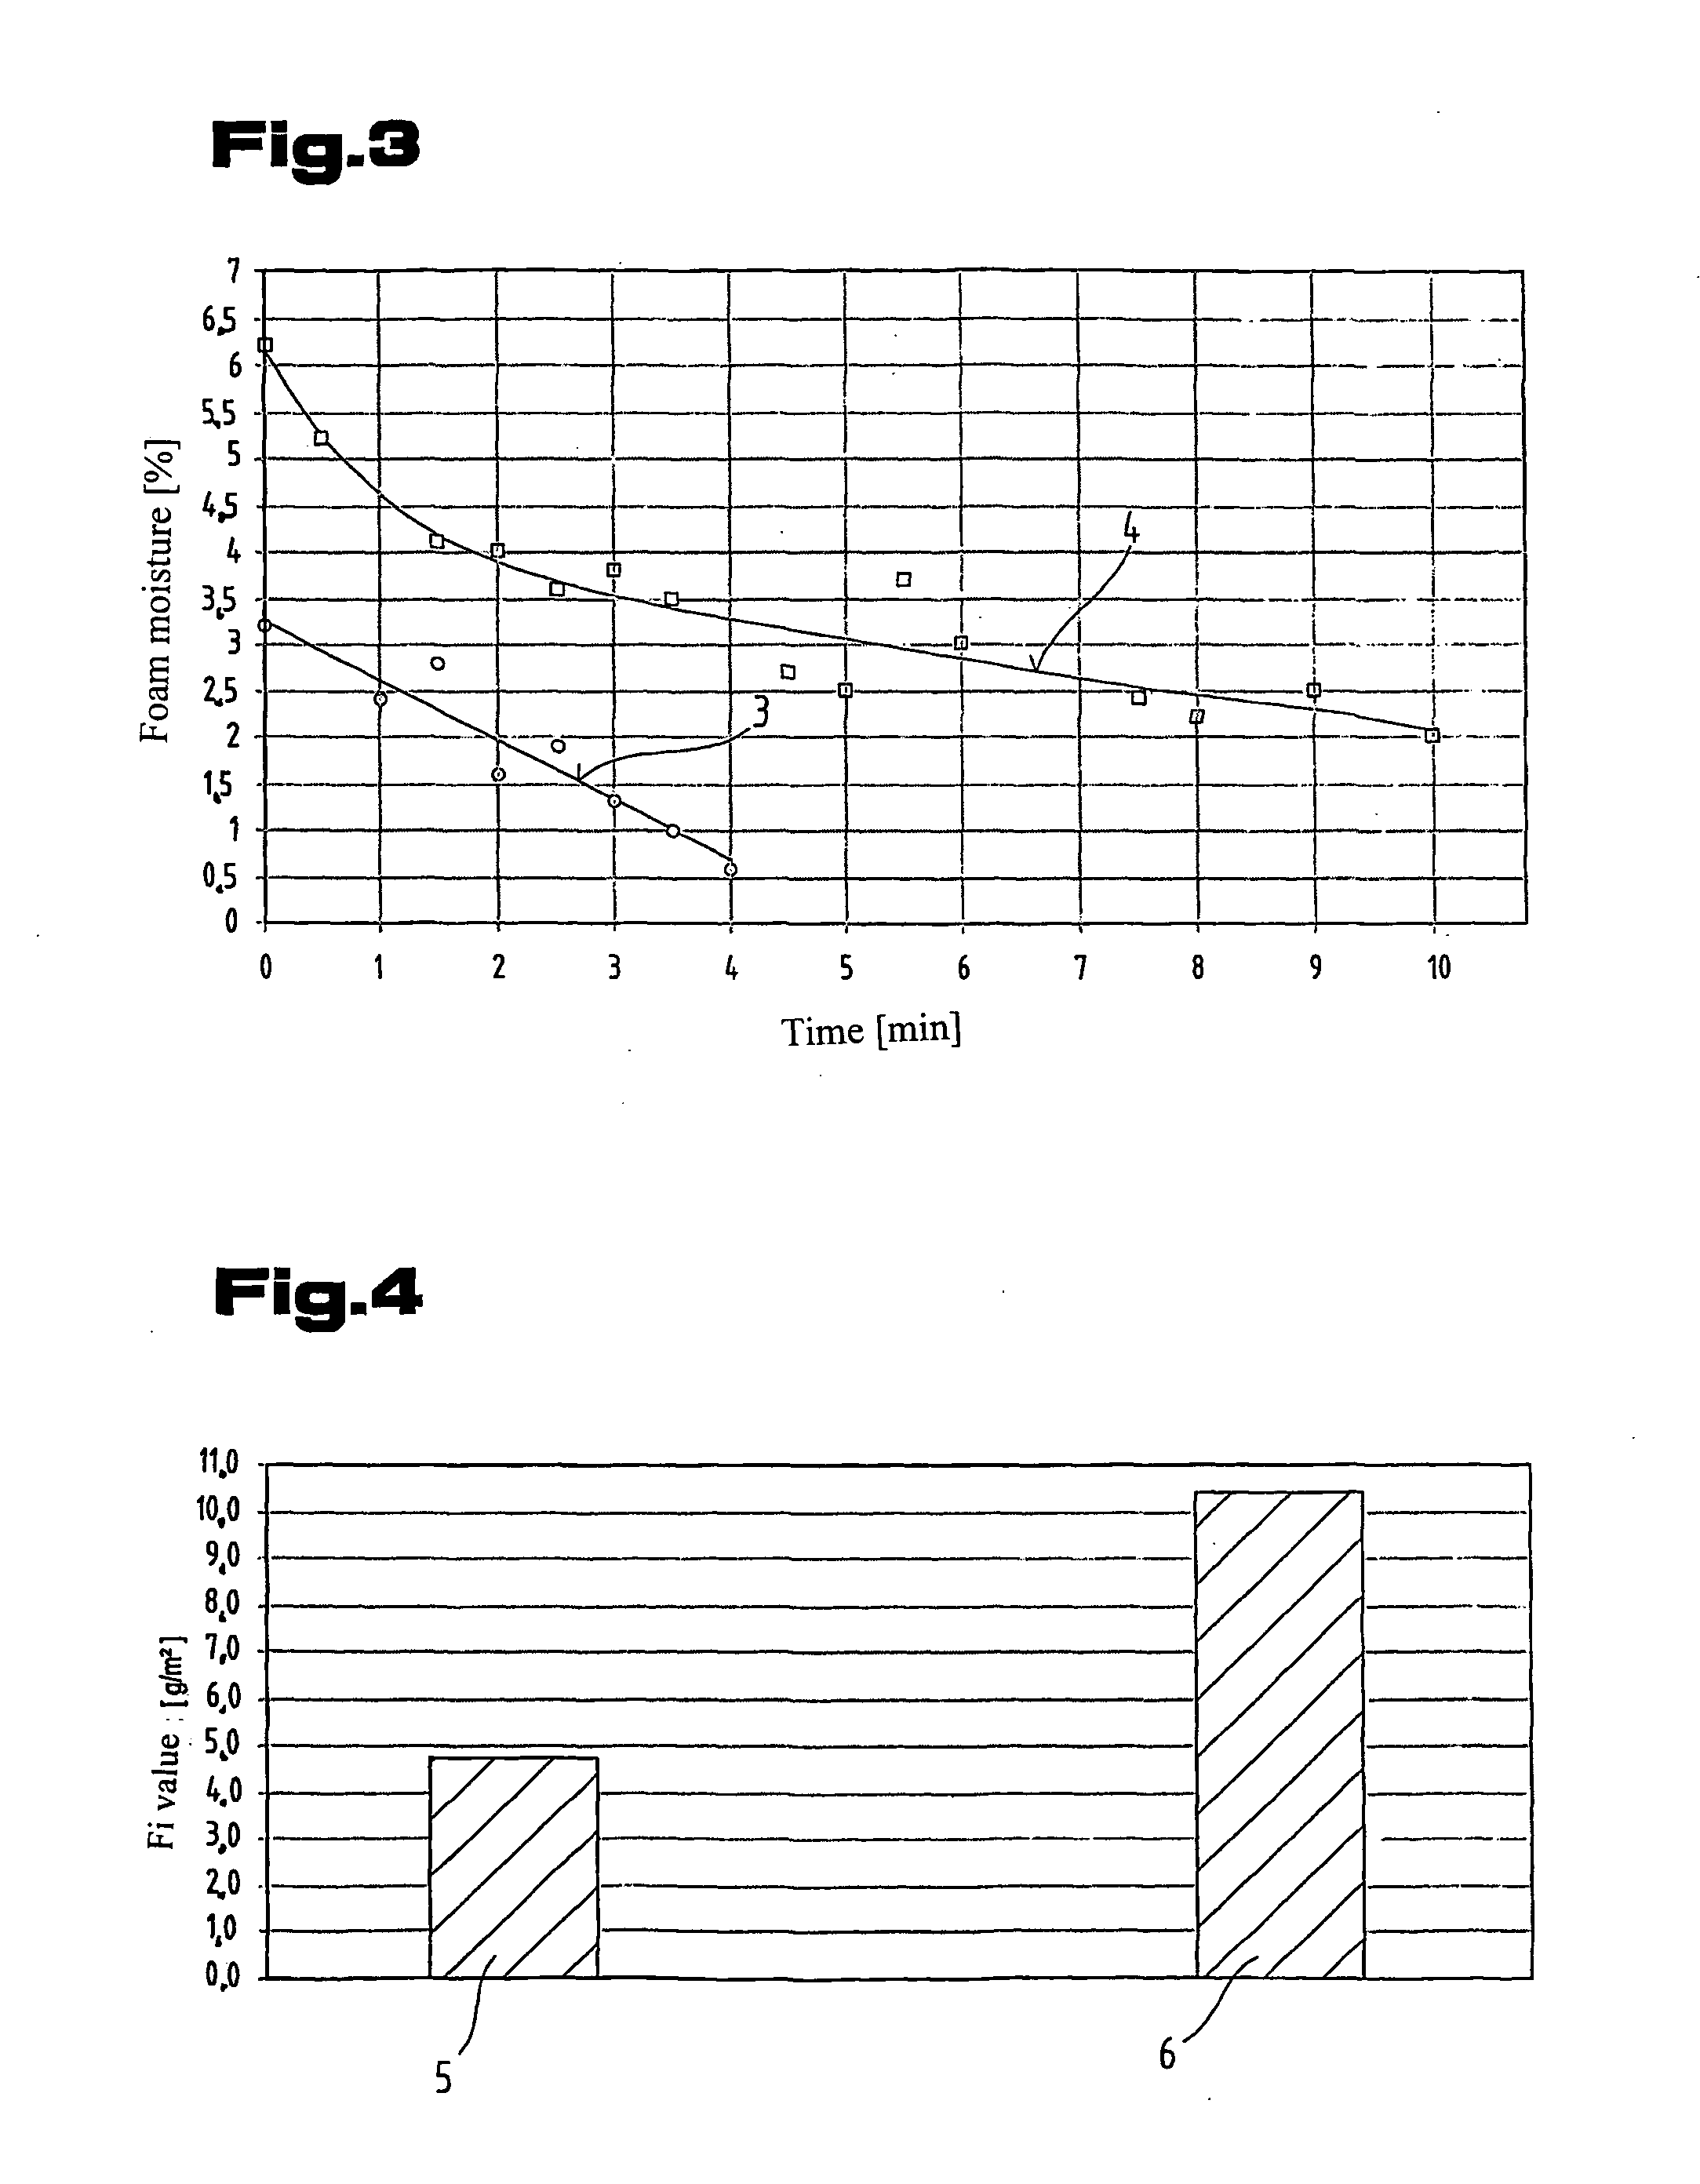 Foam element with hydrophilic substances incorporated in it